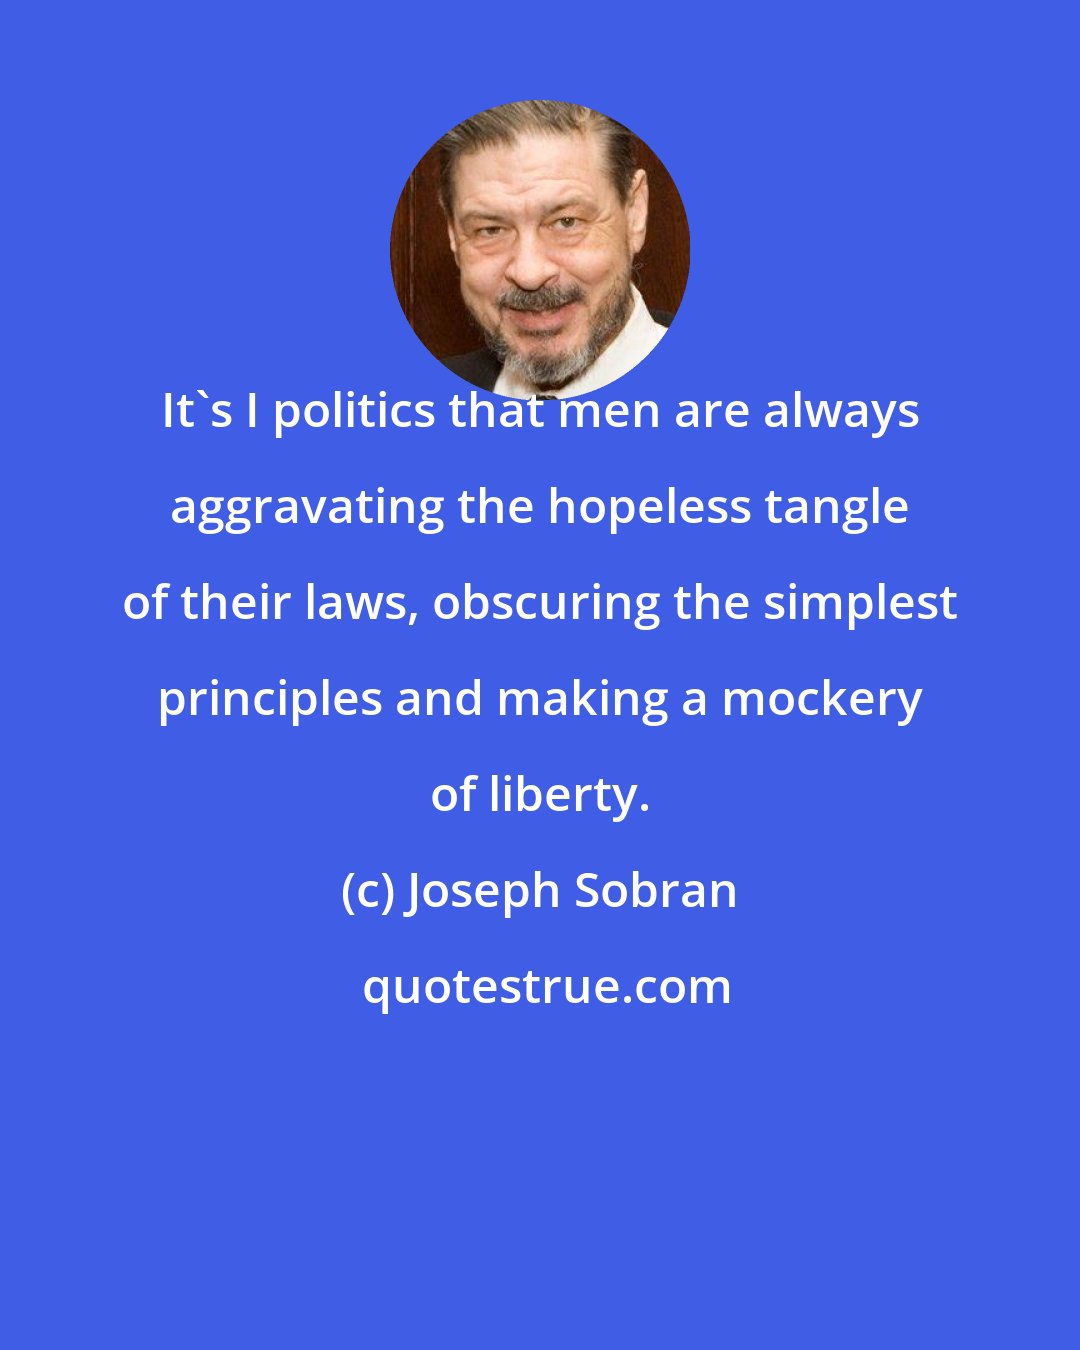 Joseph Sobran: It's I politics that men are always aggravating the hopeless tangle of their laws, obscuring the simplest principles and making a mockery of liberty.